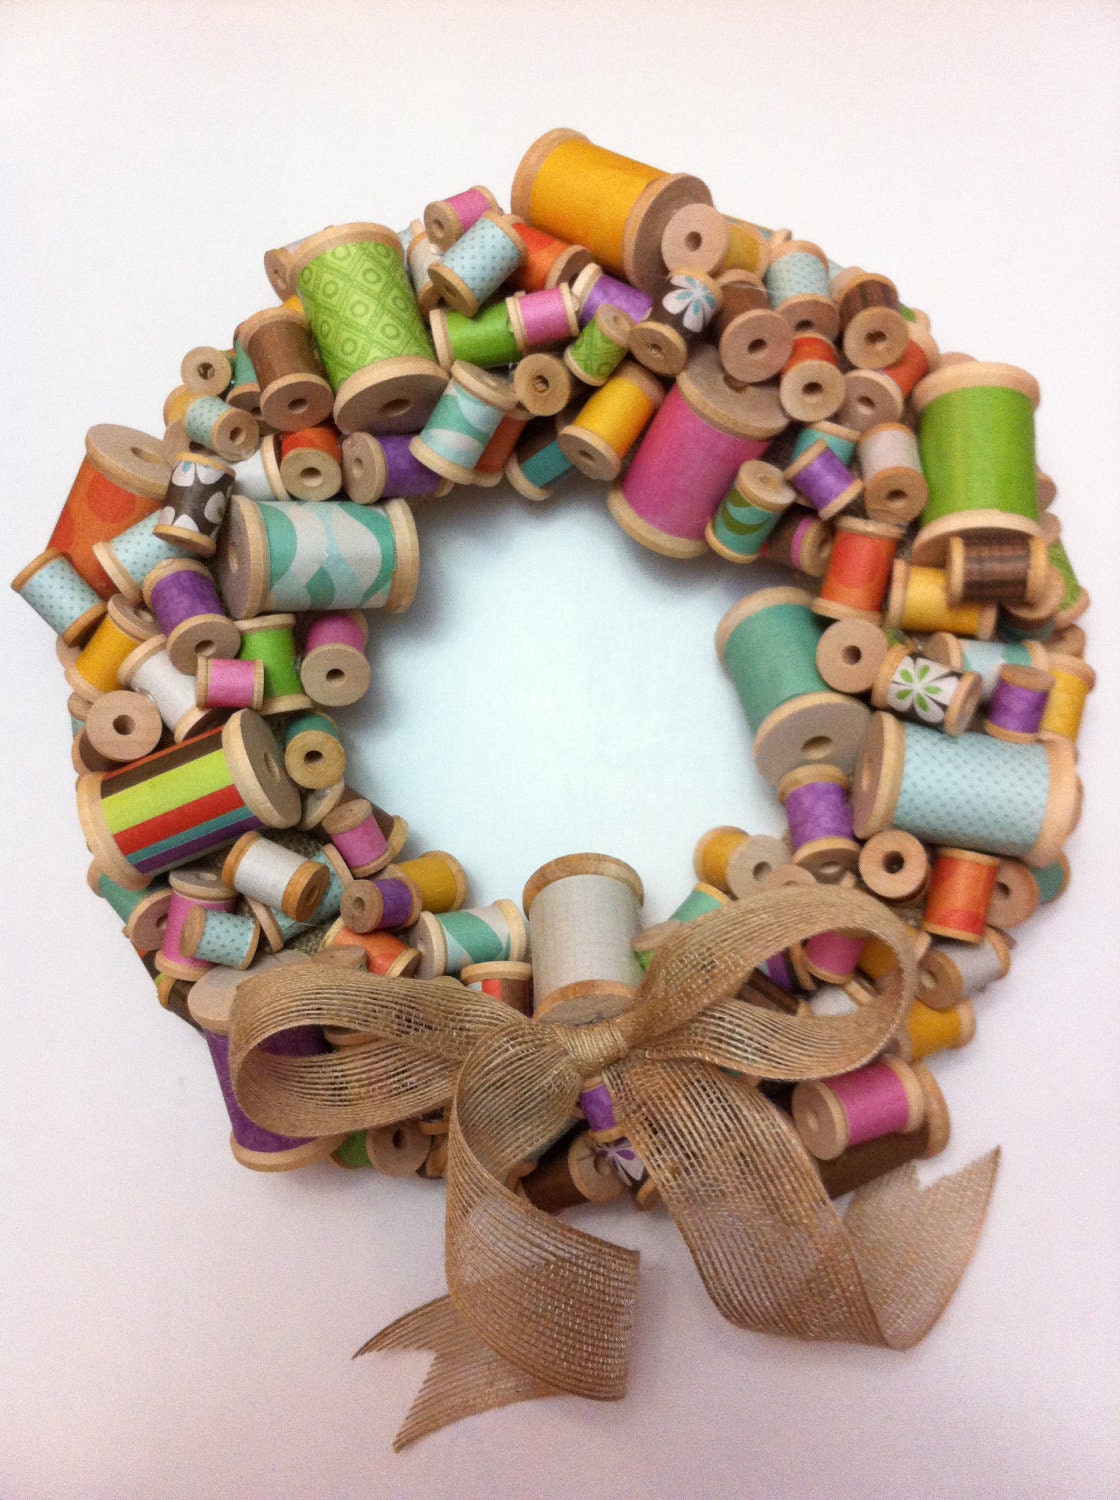 Colorful Wooden Spool Wreath with Burlap Bow - 8 inch